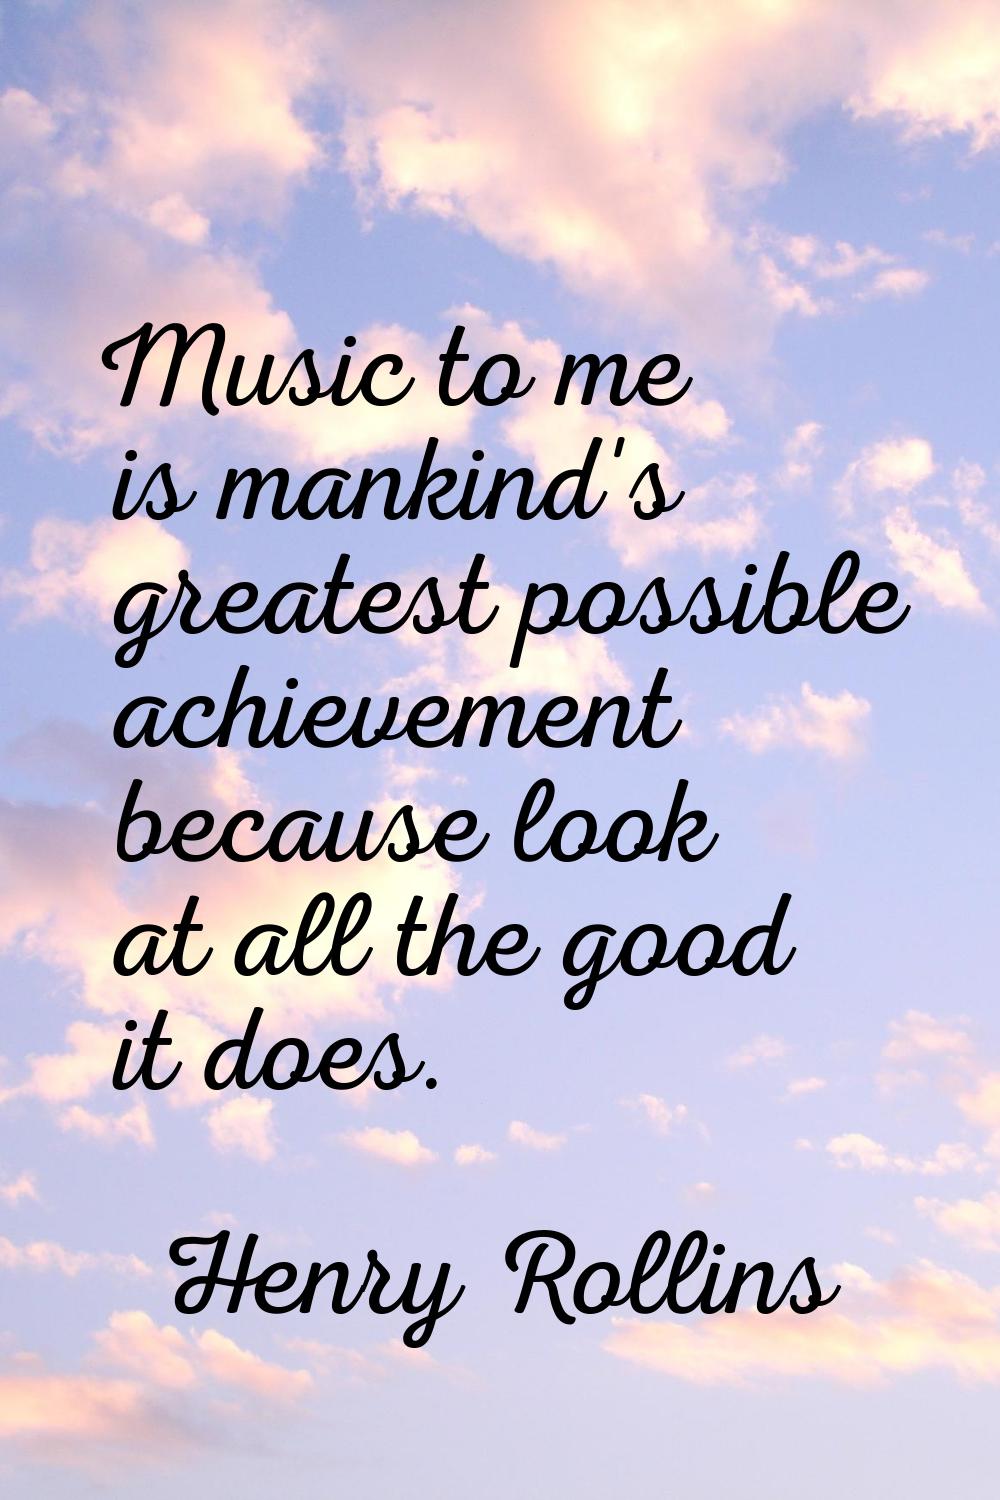 Music to me is mankind's greatest possible achievement because look at all the good it does.